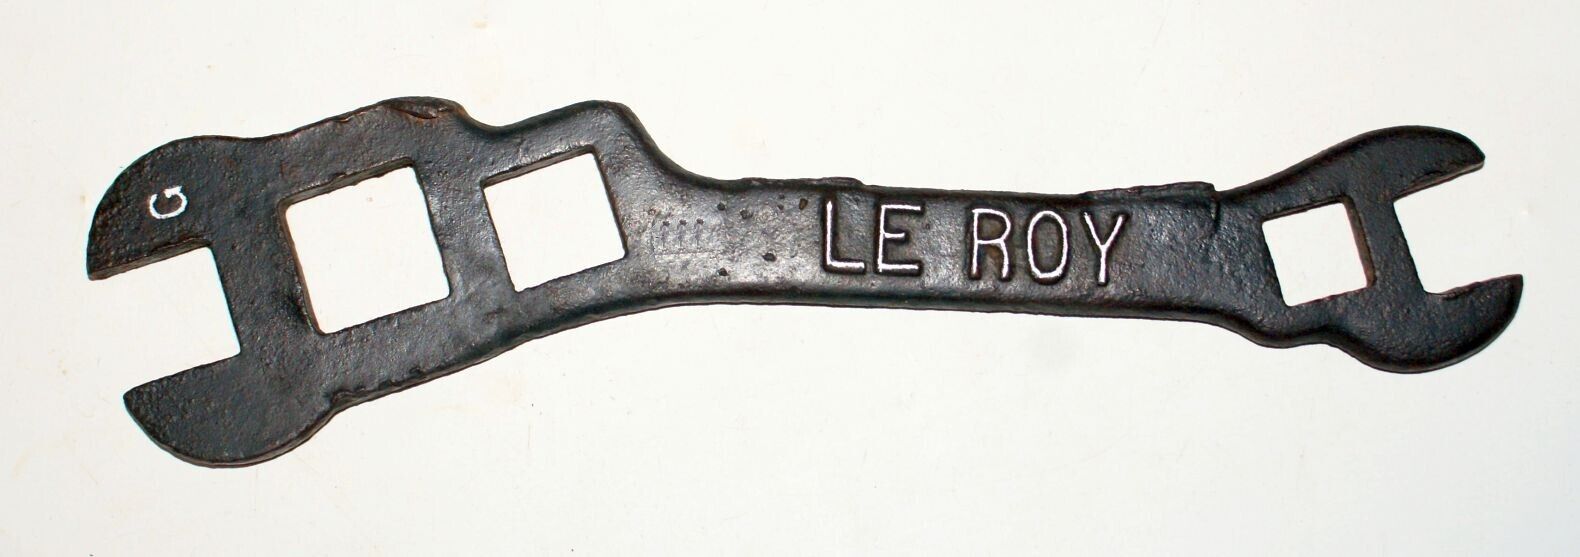 Old Vintage Le Roy LEROY 37 plow Farm Implement Wrench Tool NY company